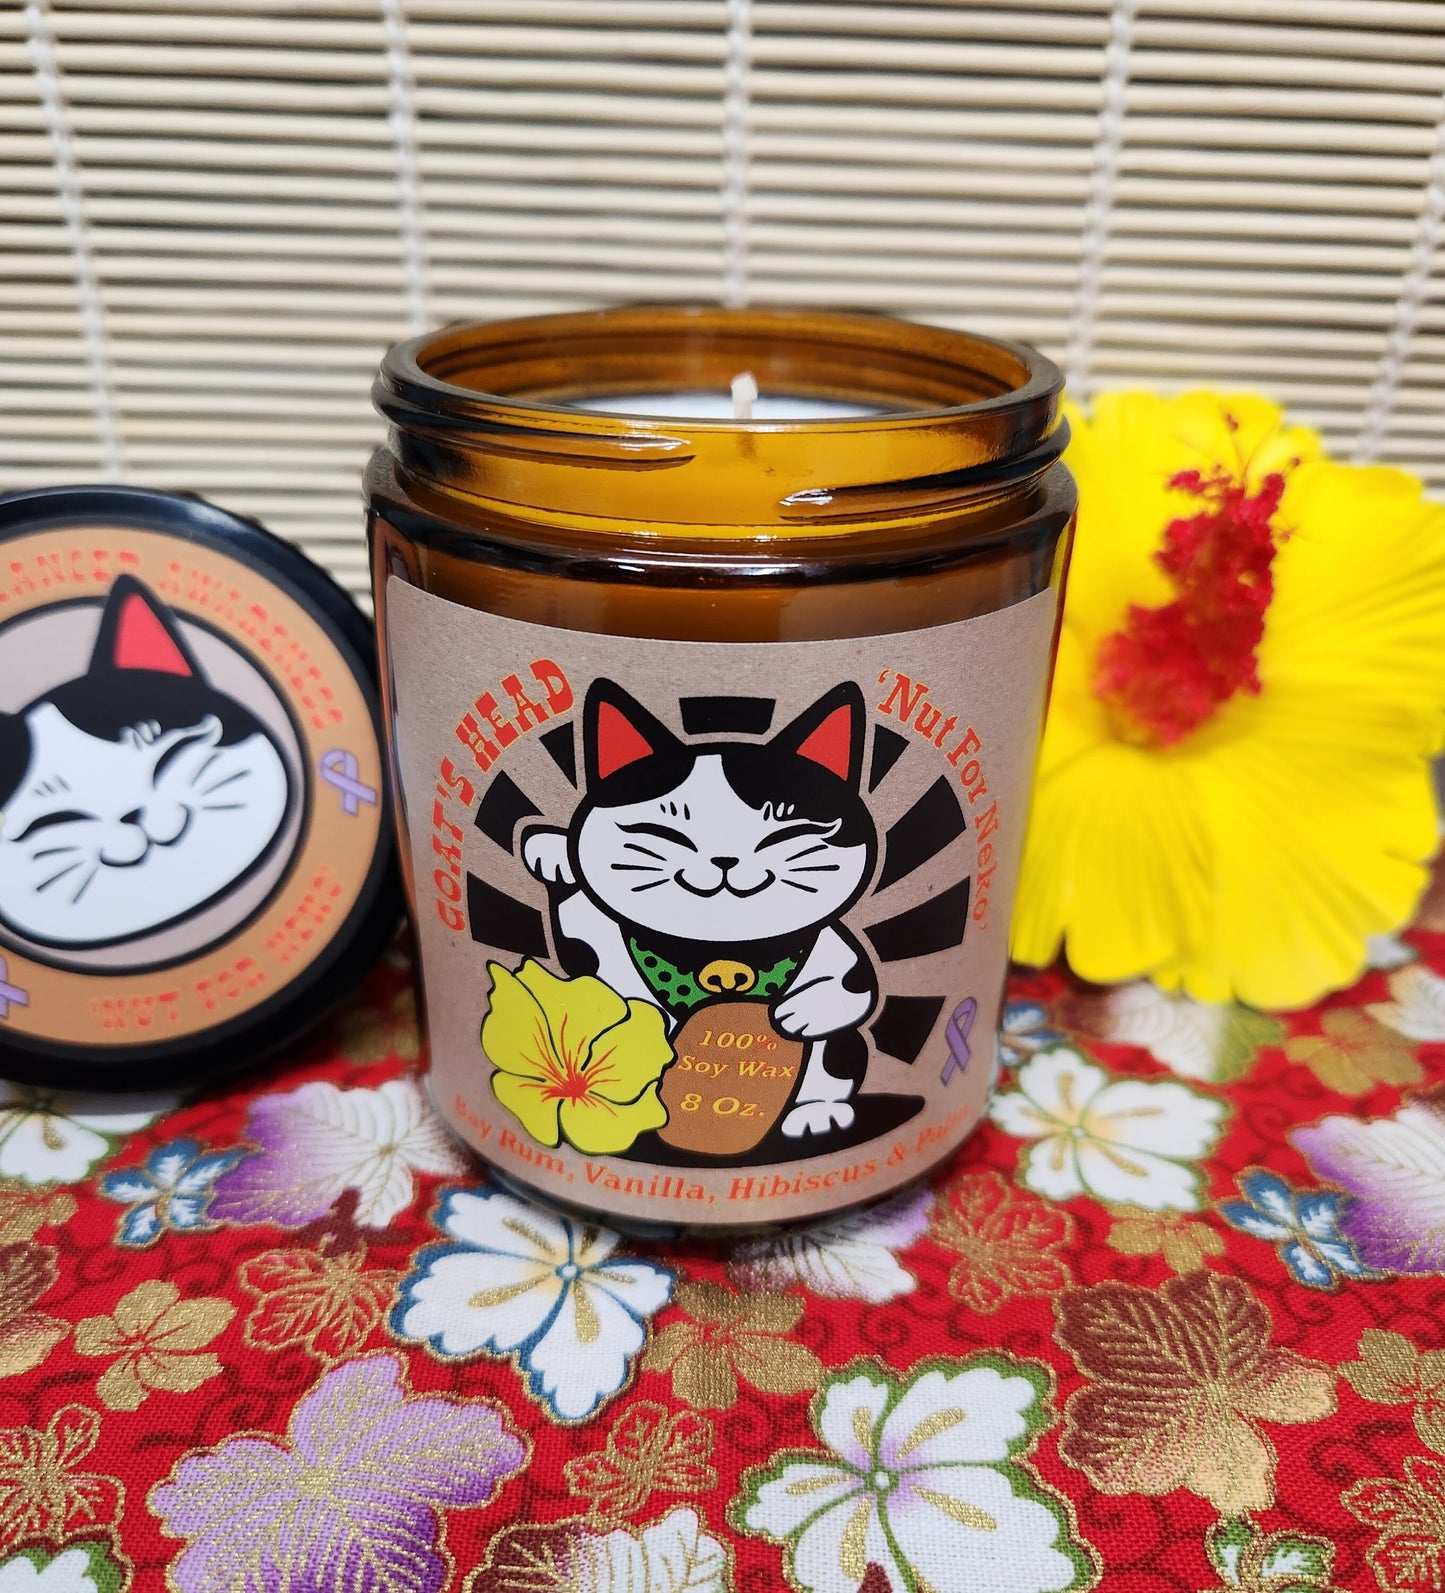 Nut For Neko  Cancer Awareness Soy Candle